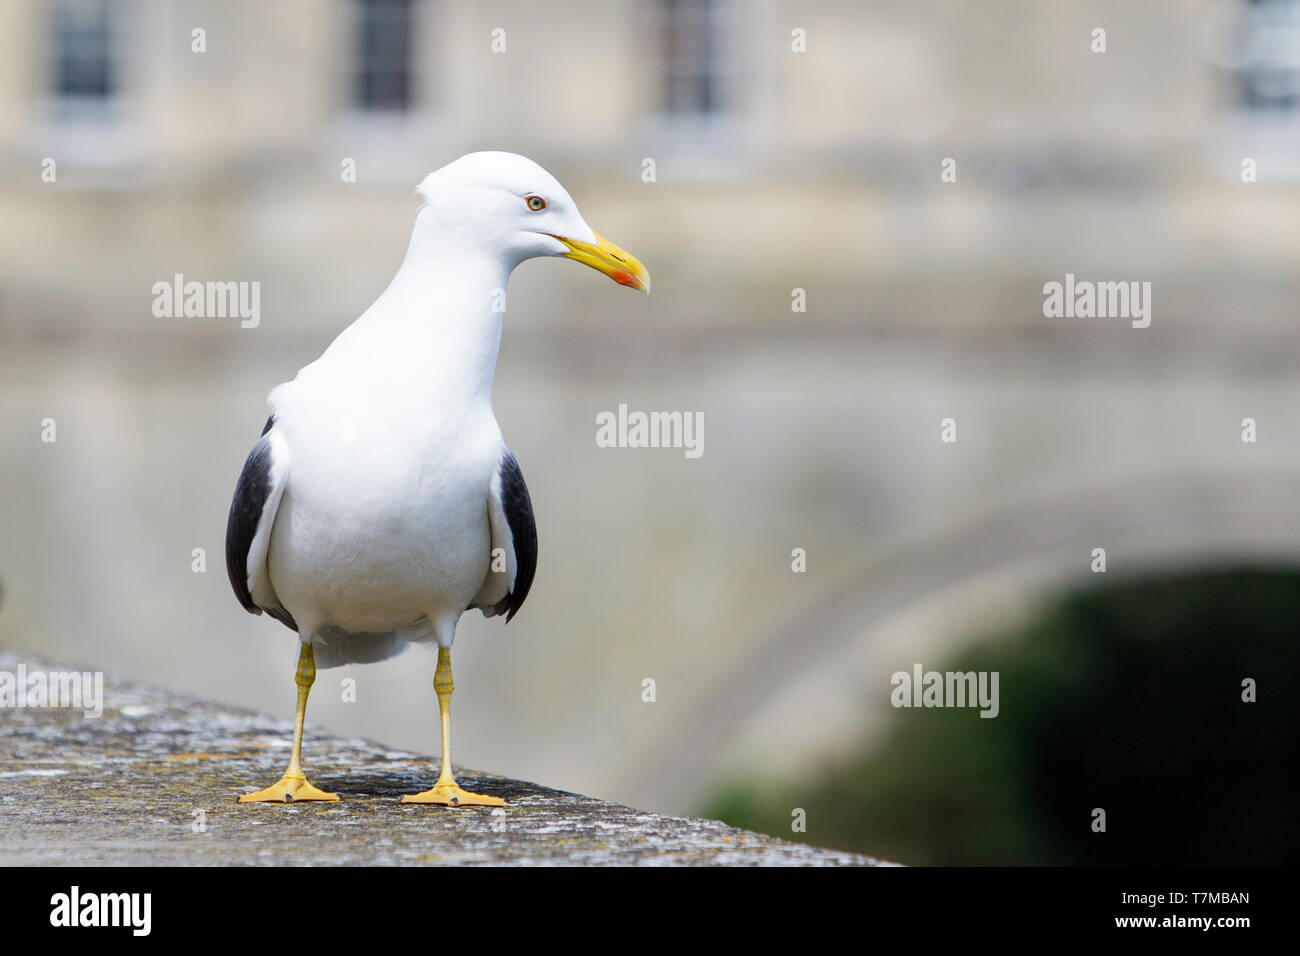 A yellow legged gull /  seagull  is pictured standing on a wall next to the river Avon in front of Pulteney bridge in Bath Somerset England UK Stock Photo